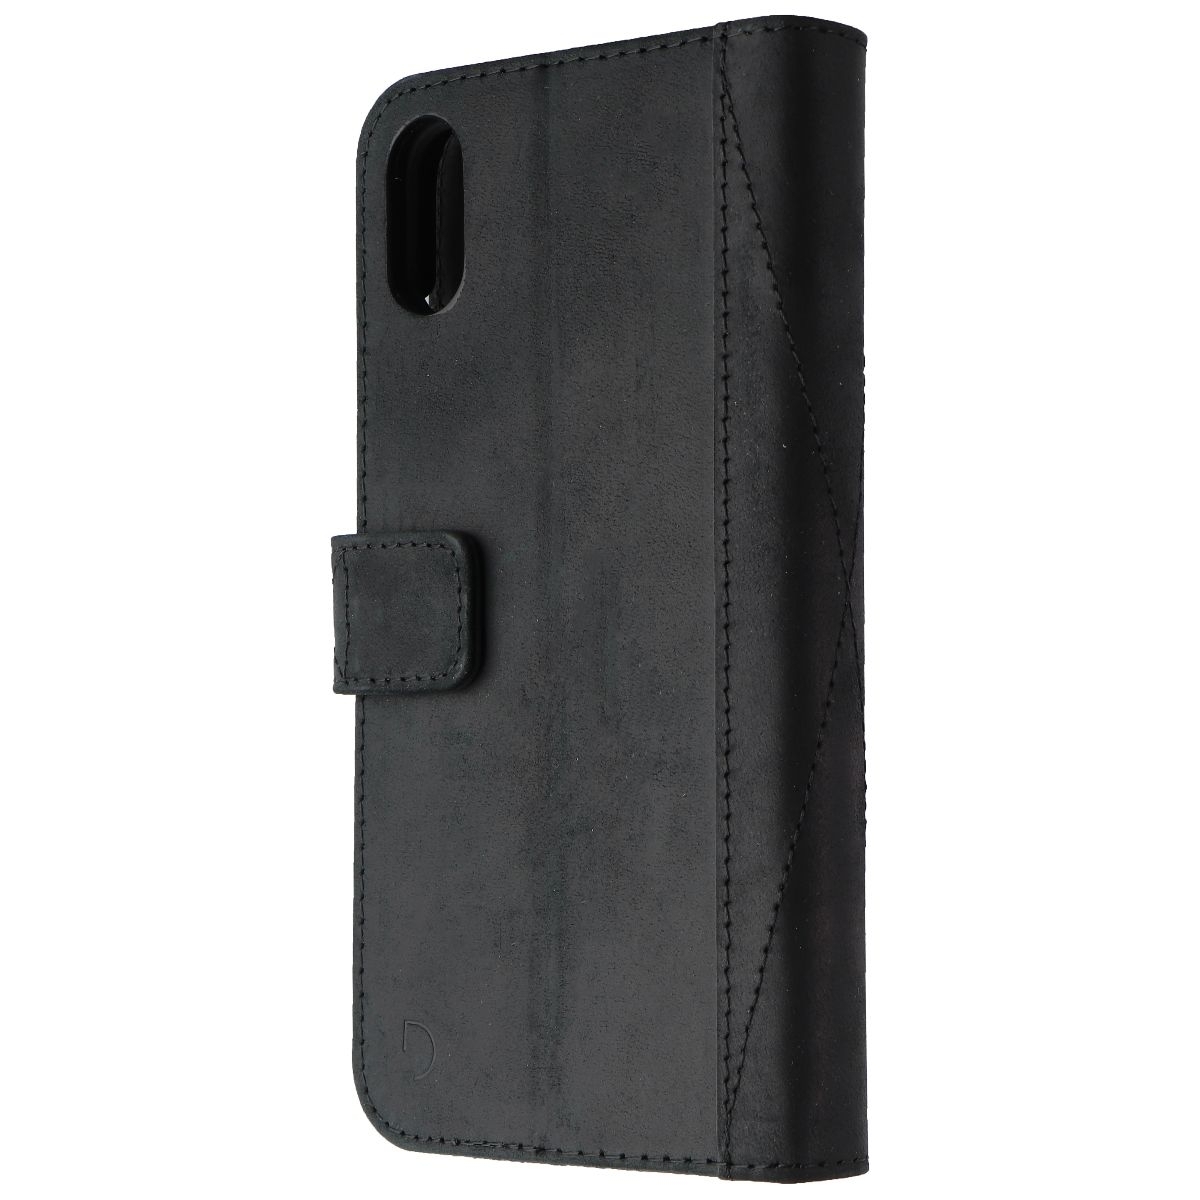 DECODED Leather 2-in-1 Wallet Case For Apple IPhone XR - Black